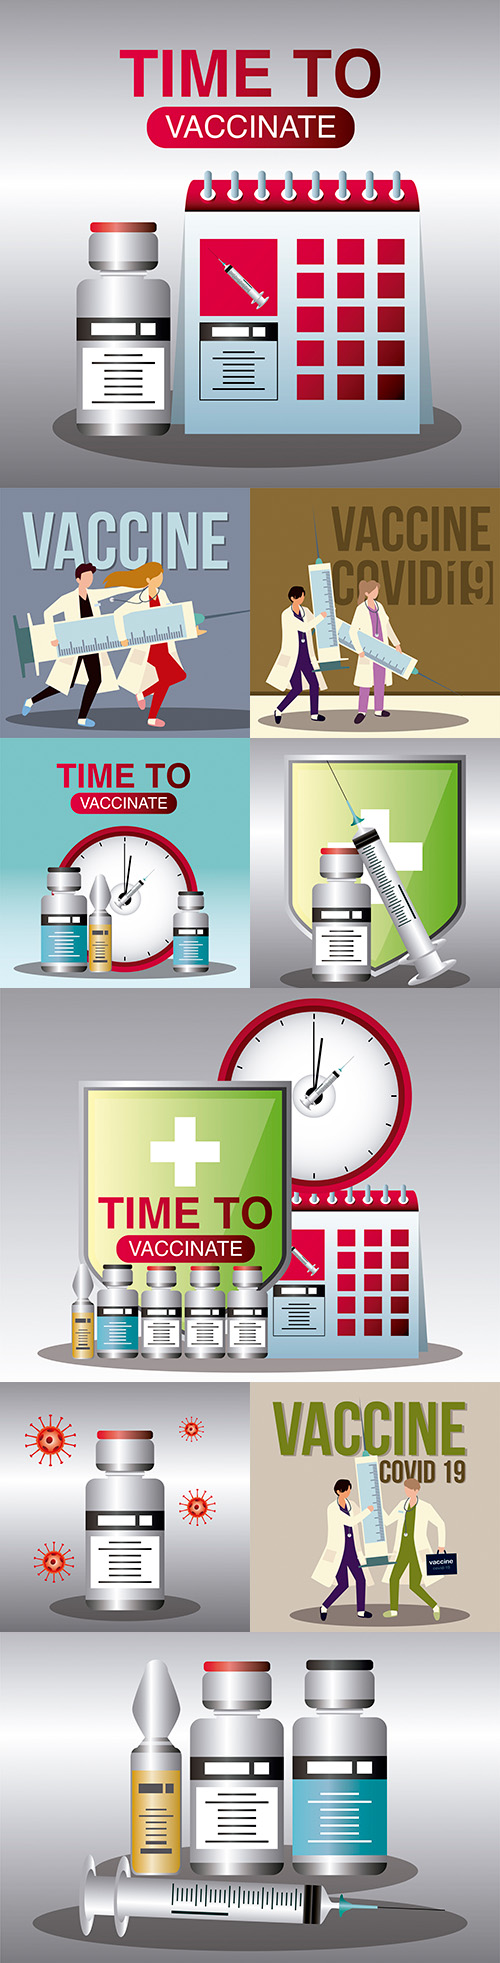 World vaccine, time to protect vaccination schedule from illustrations
